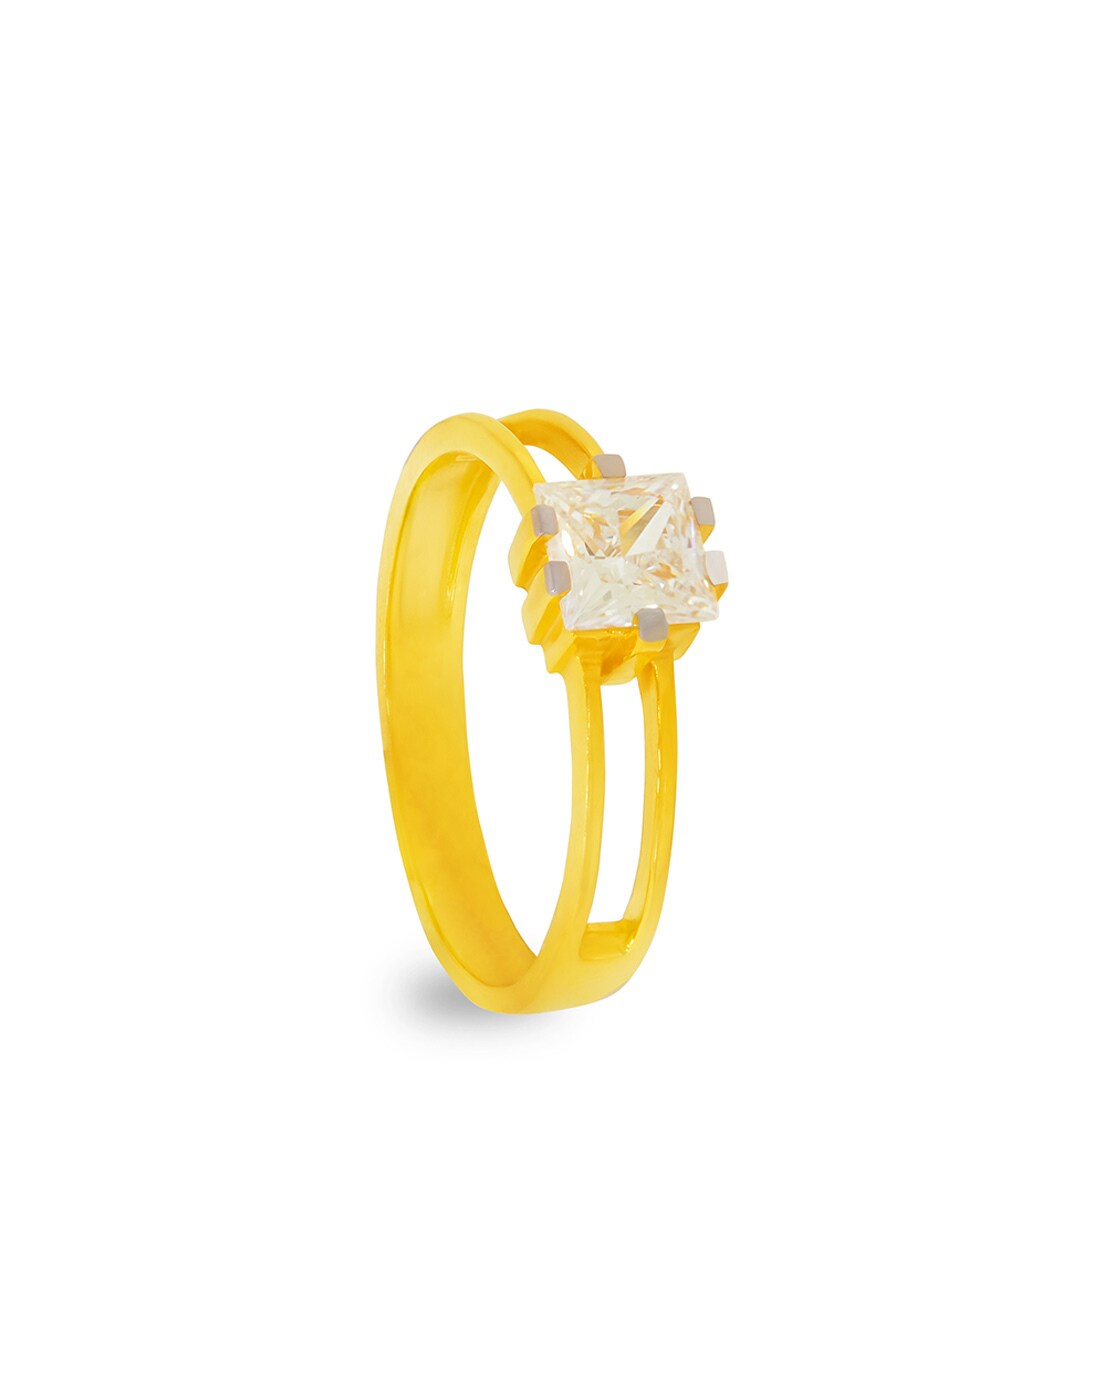 Bhima Jewellers Gold Ring Collections Discounts Factory | webmail.dvnet.ec